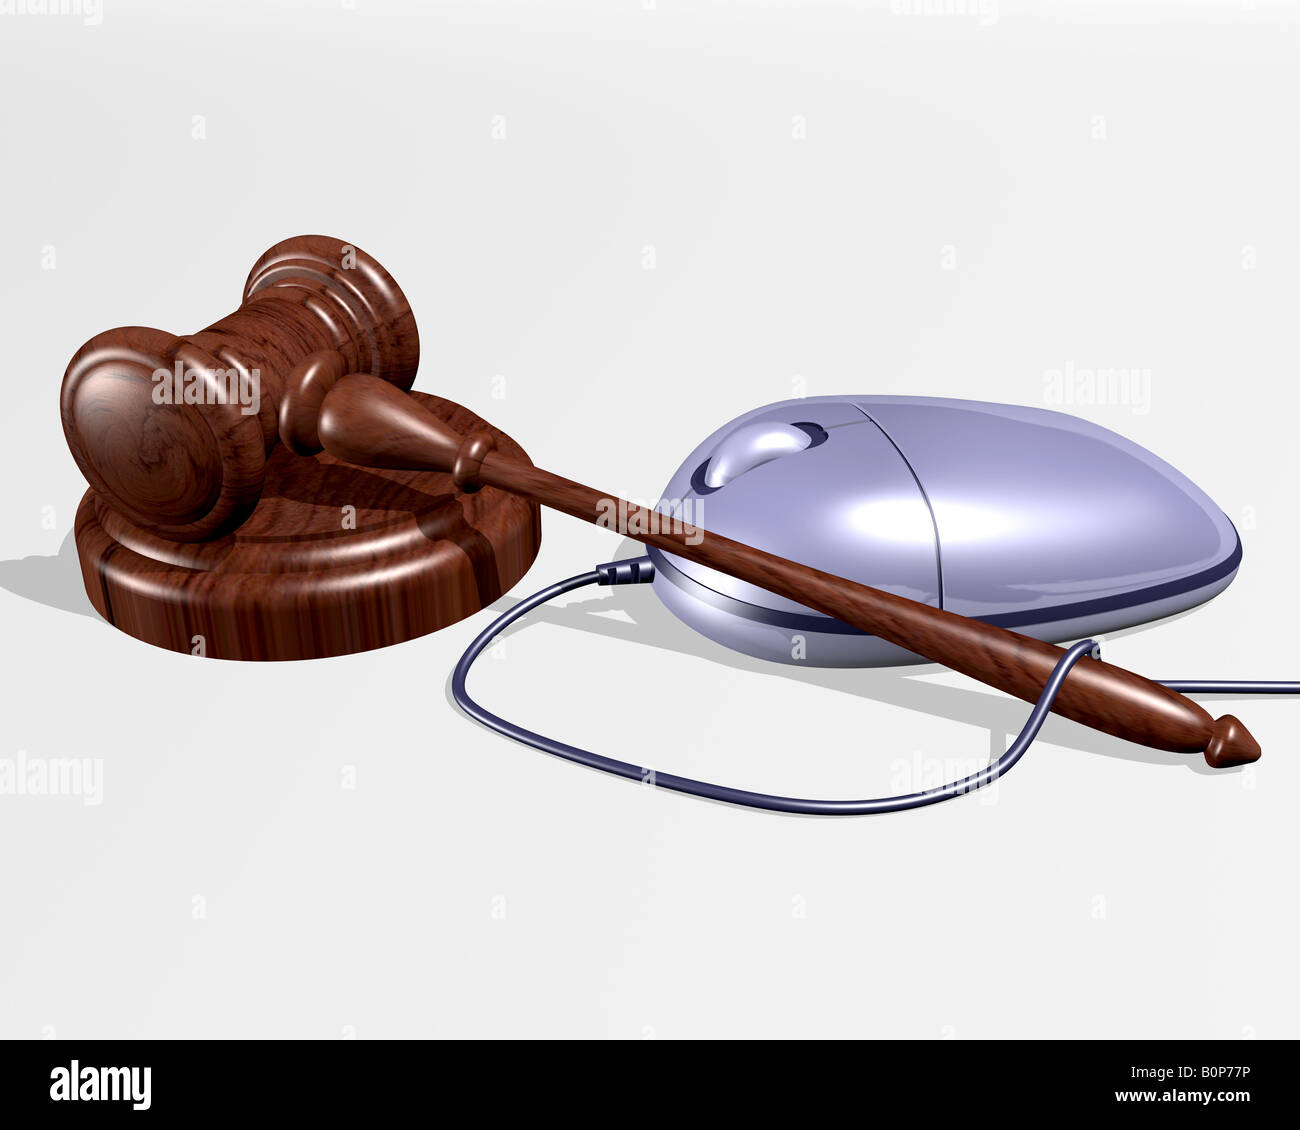 A gavel resting near a computer mouse representing Internet auctions Stock Photo